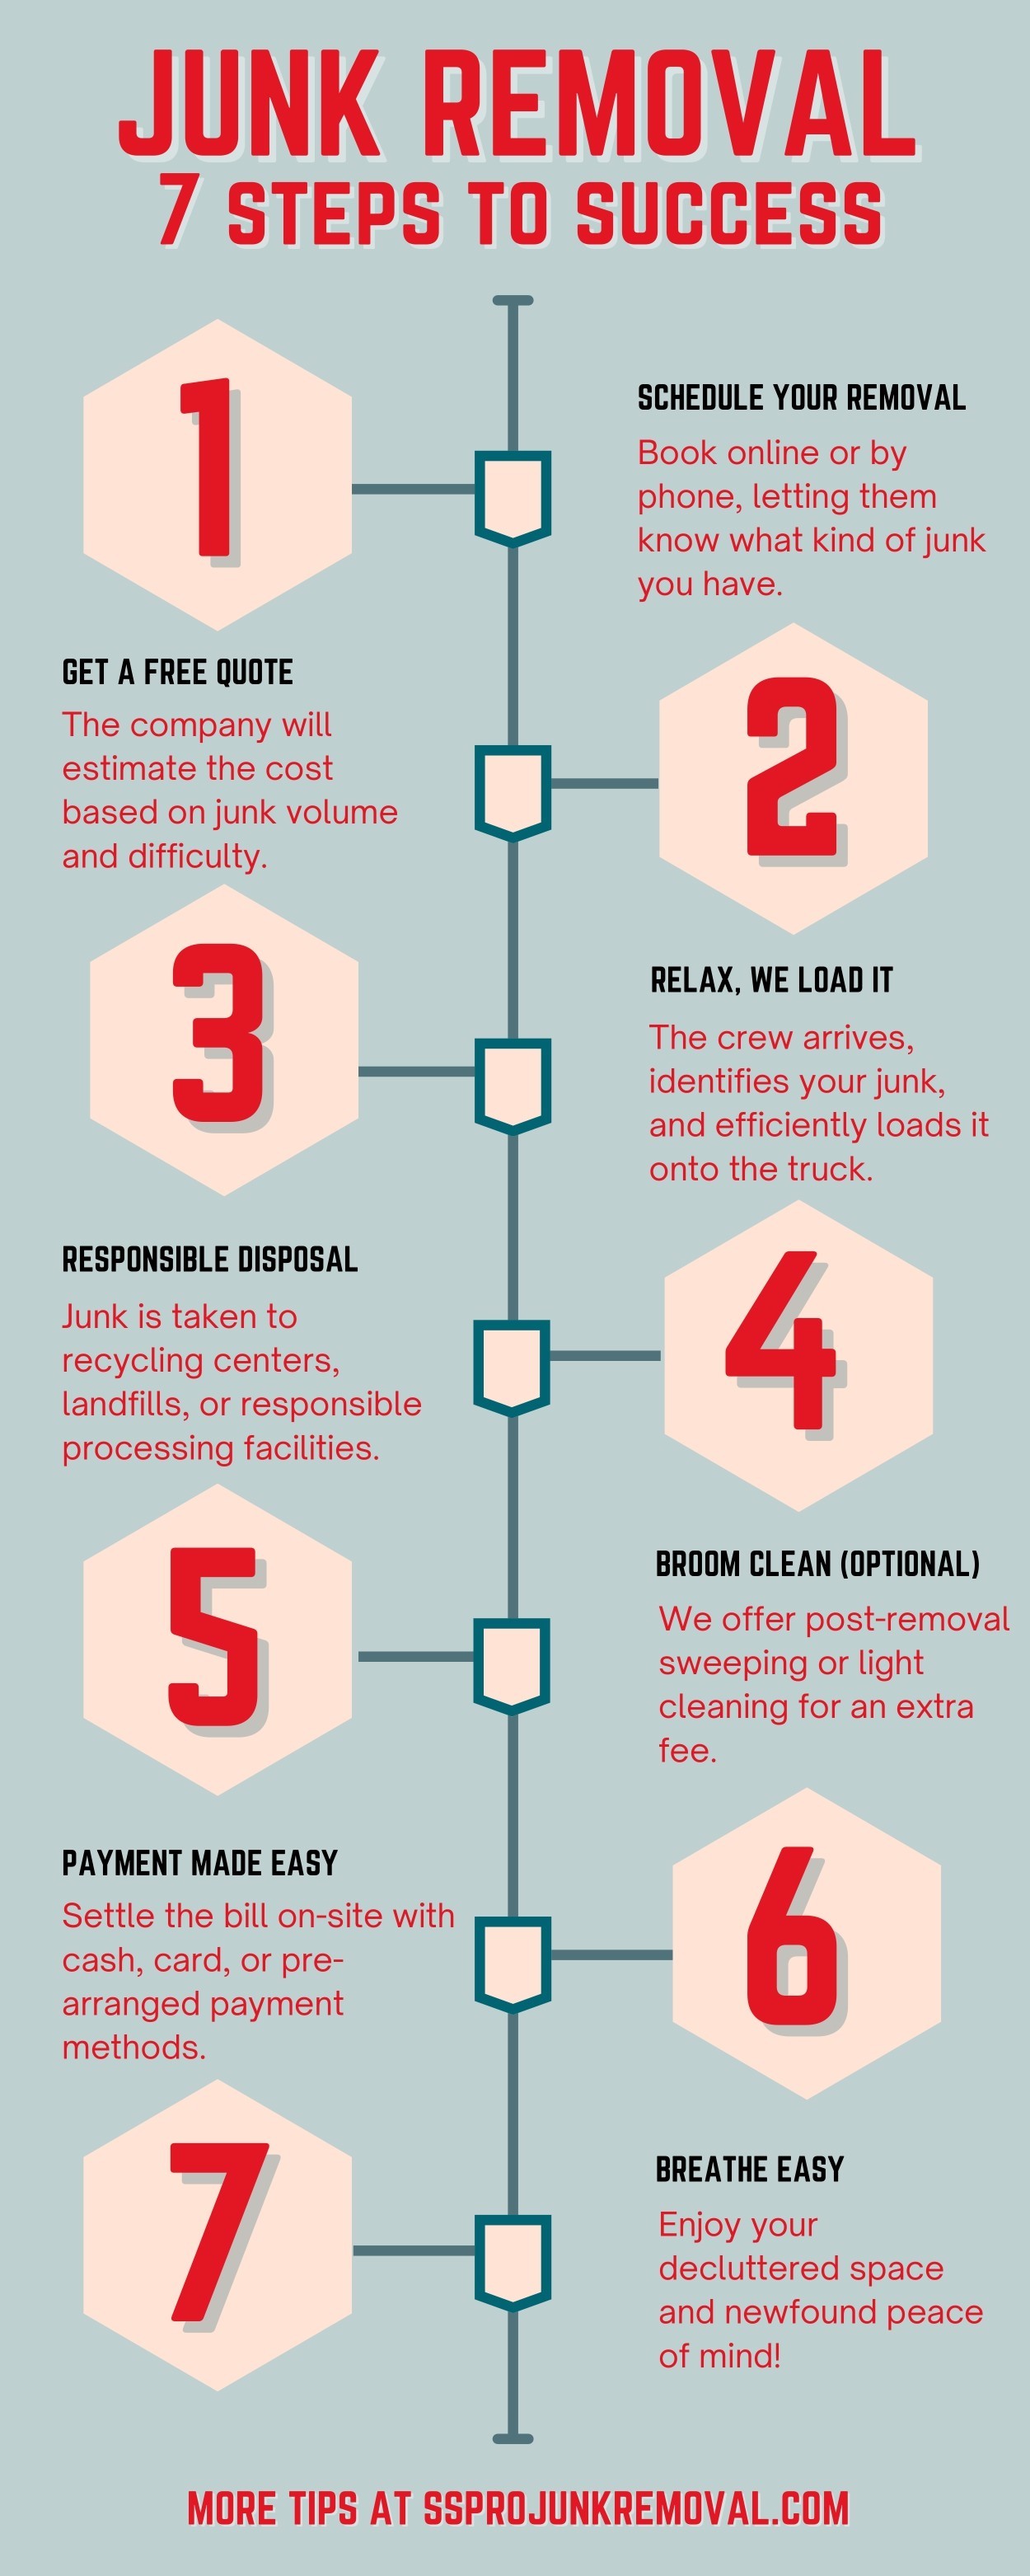 Junk Removal: 7 Steps To Success [Infographic]